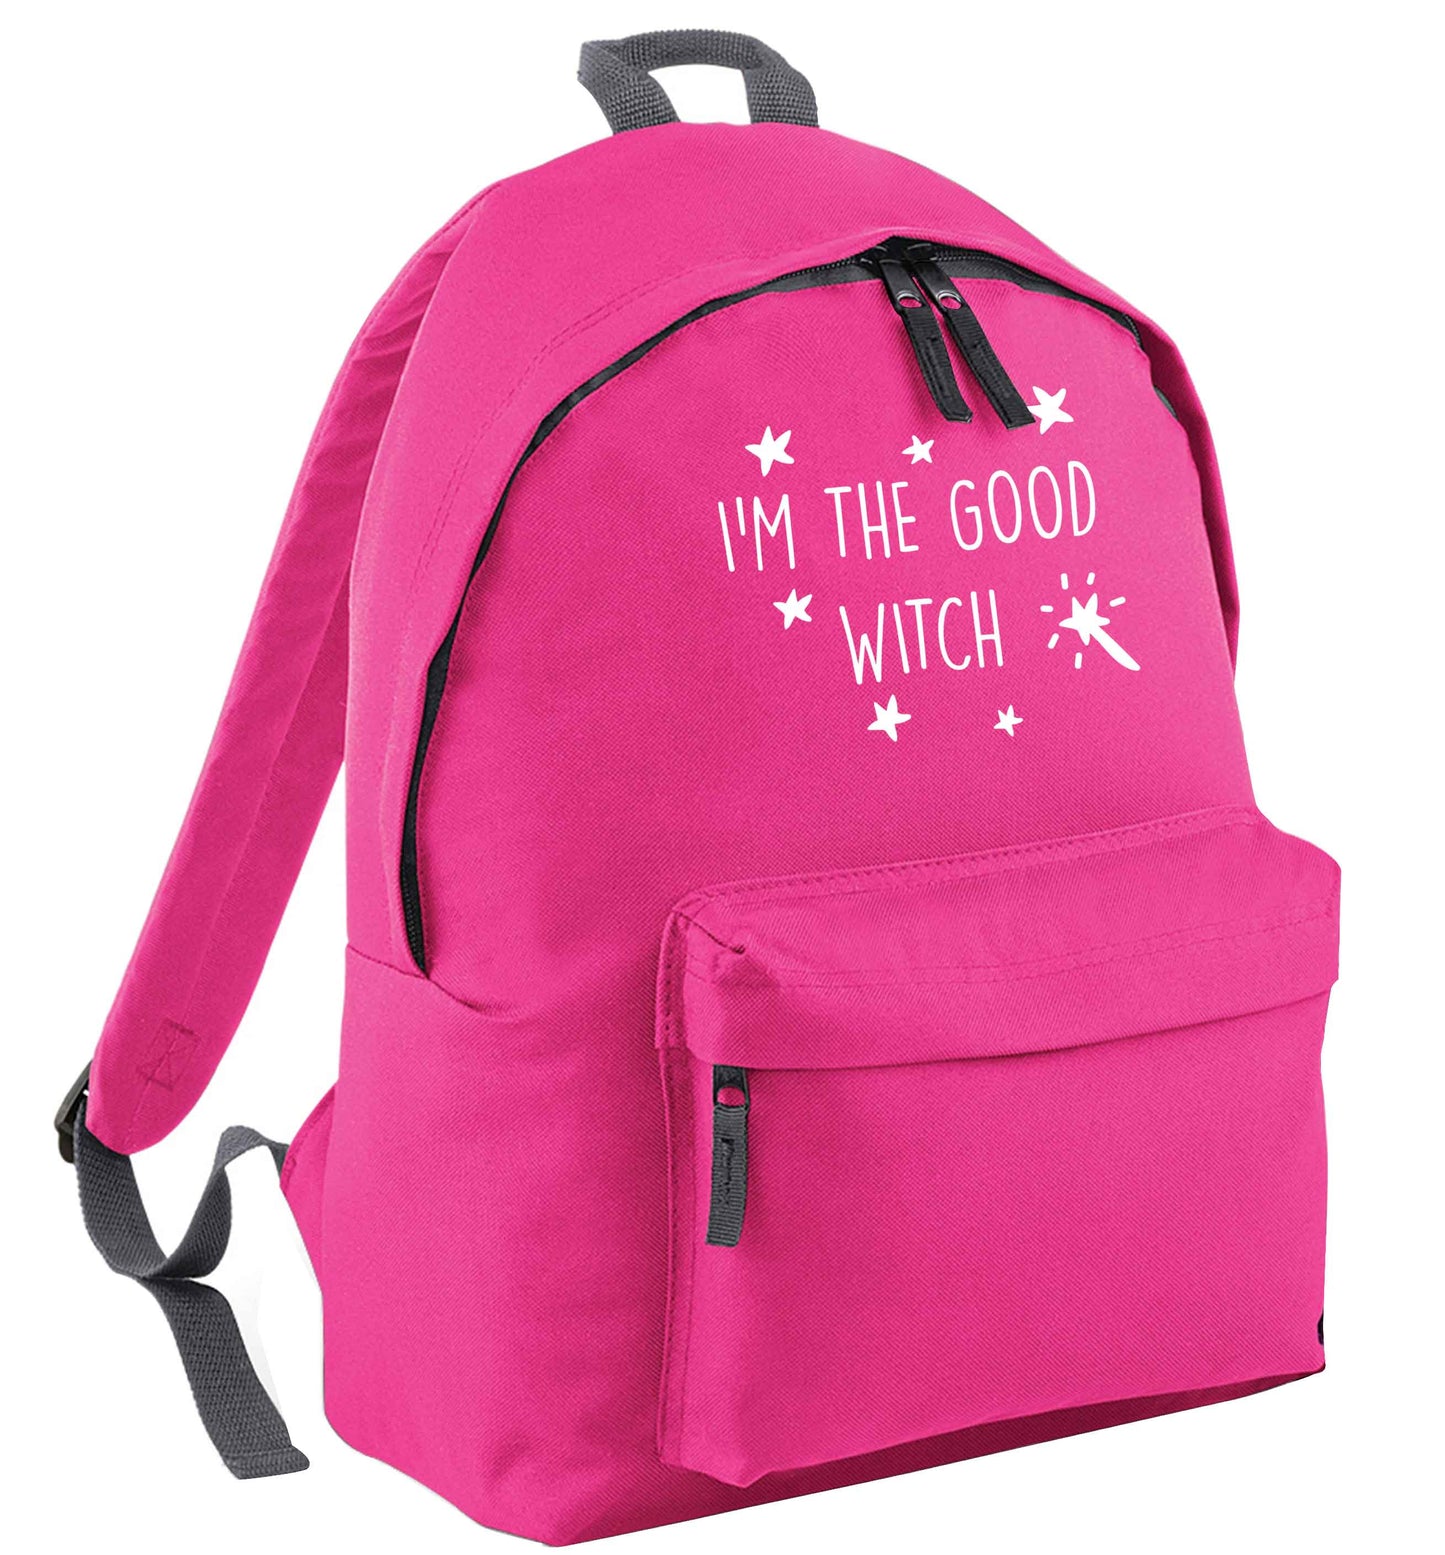 Good witch | Children's backpack